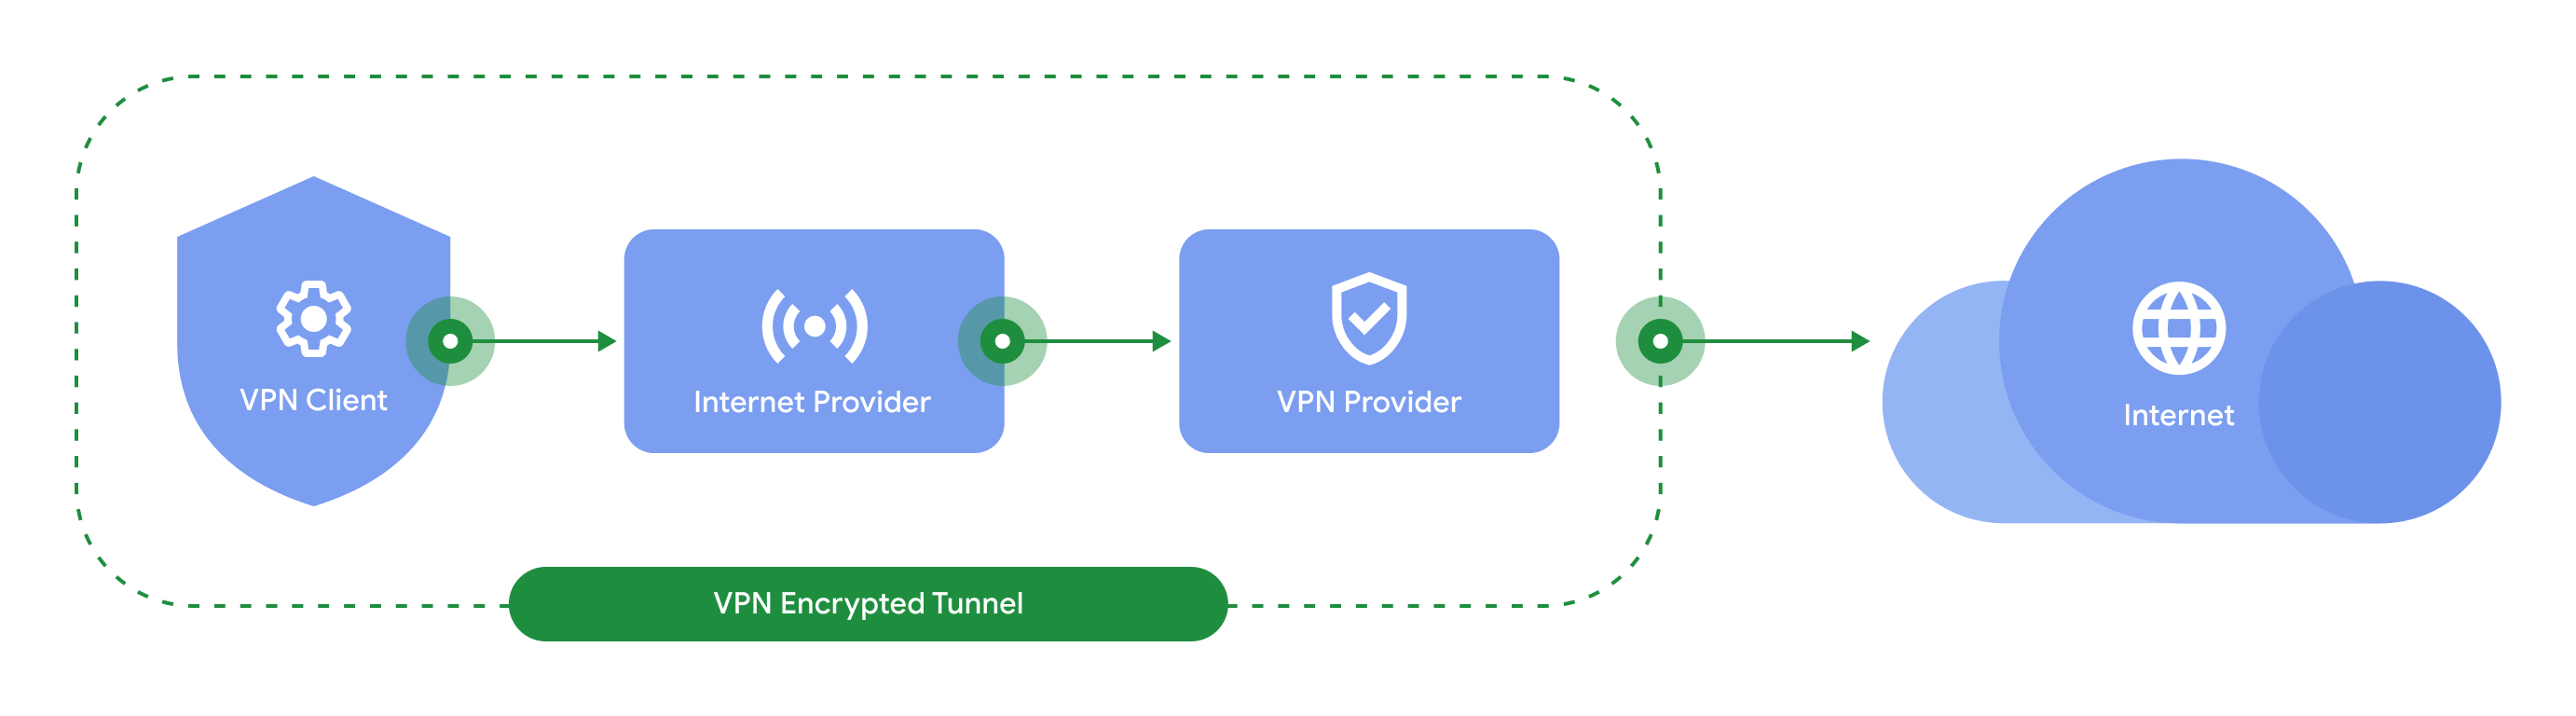 6 questions you might have about VPN by Google One